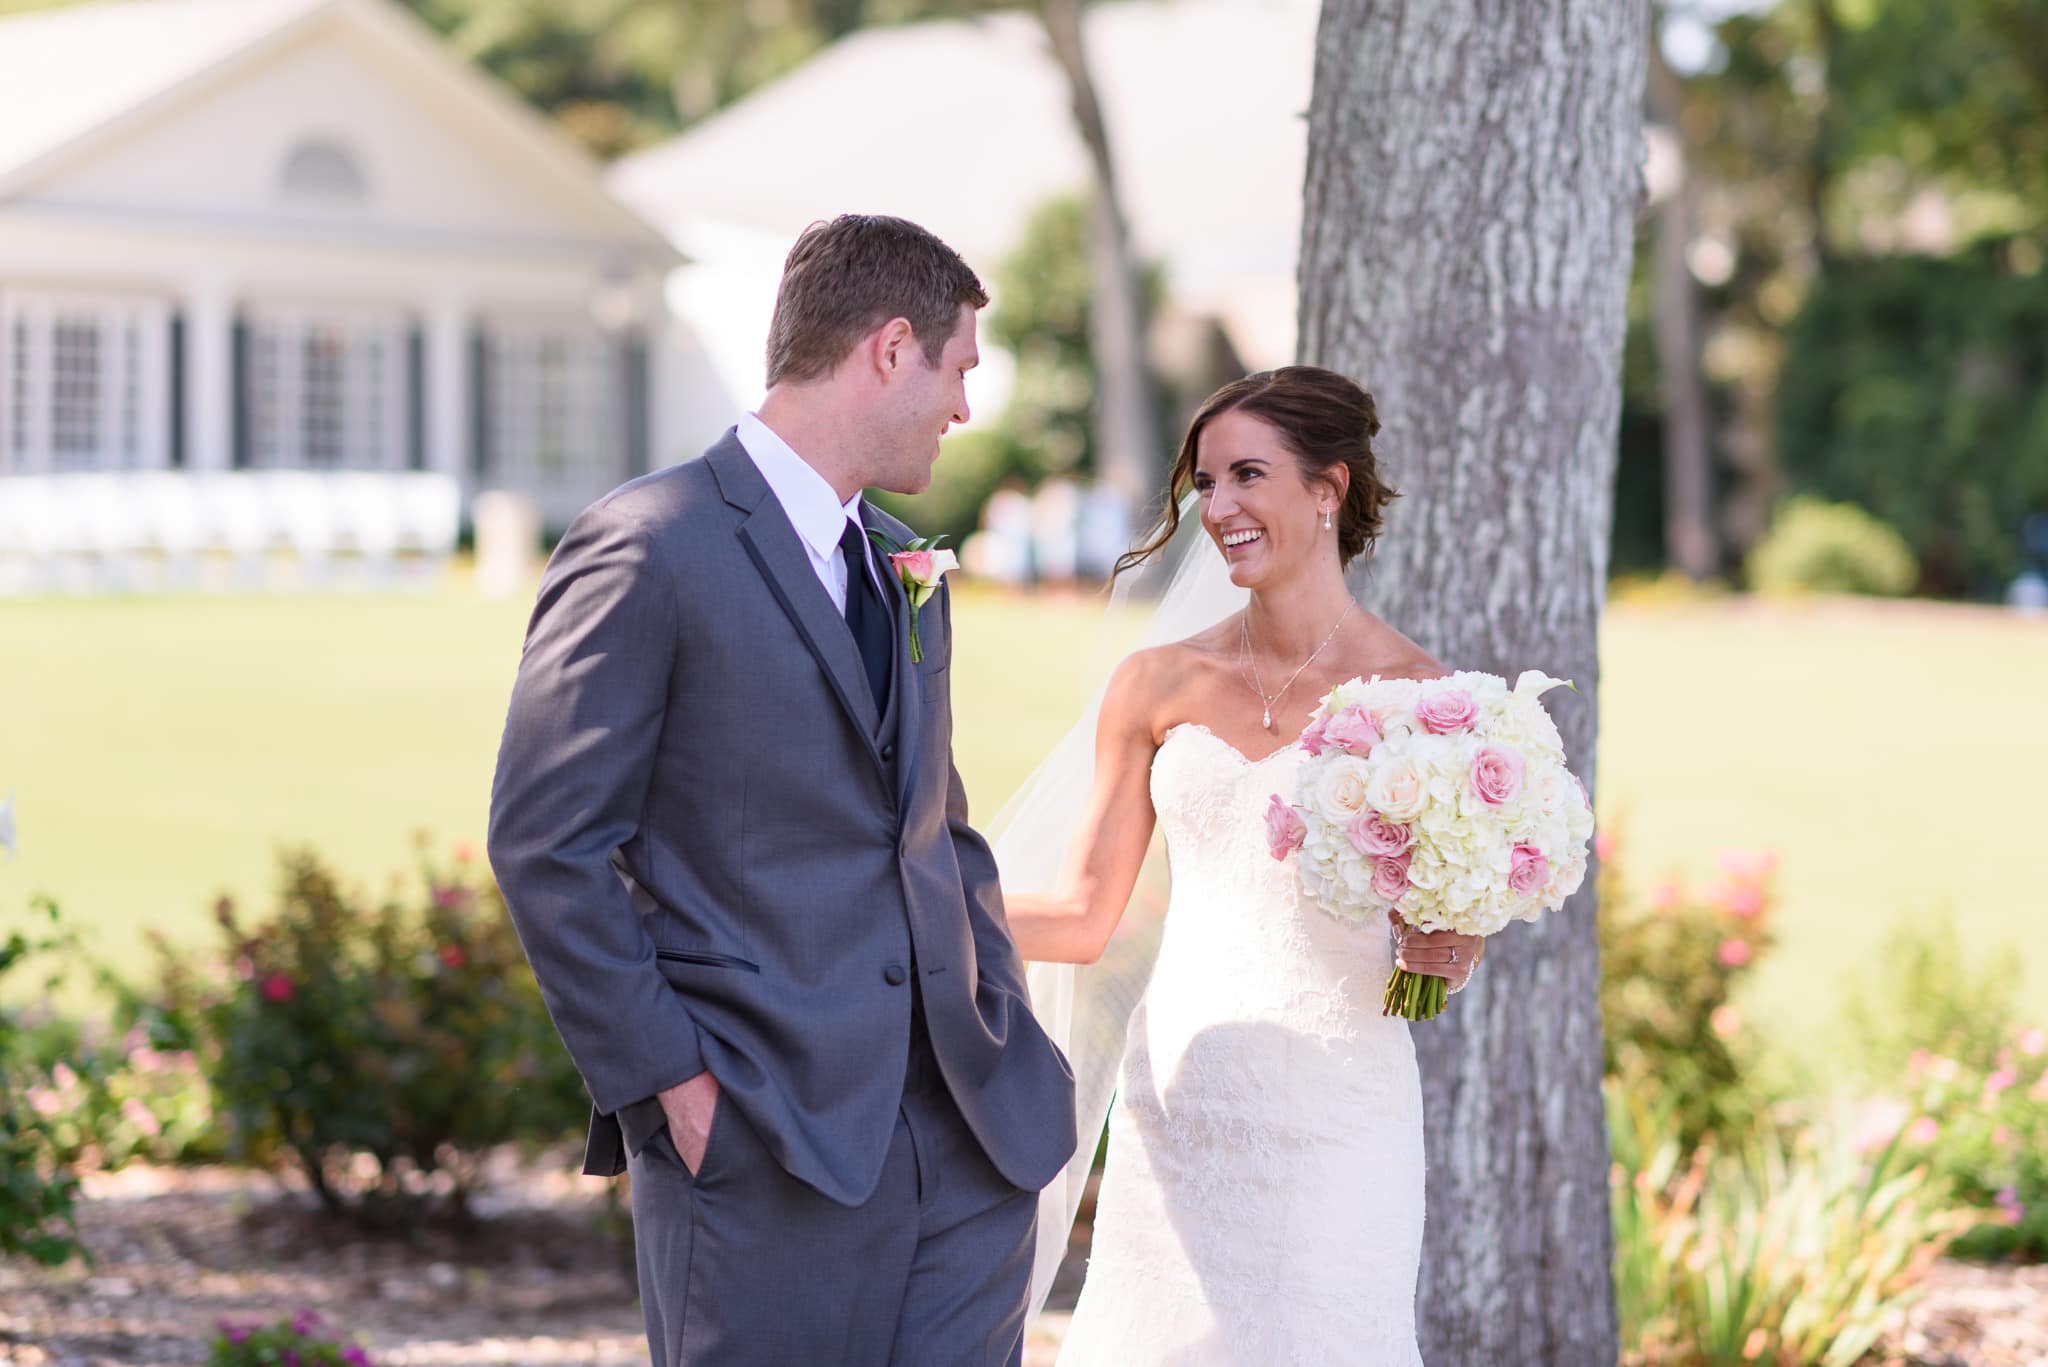 First look - Bride and groom smiling at each other for first time - Pawleys Plantation